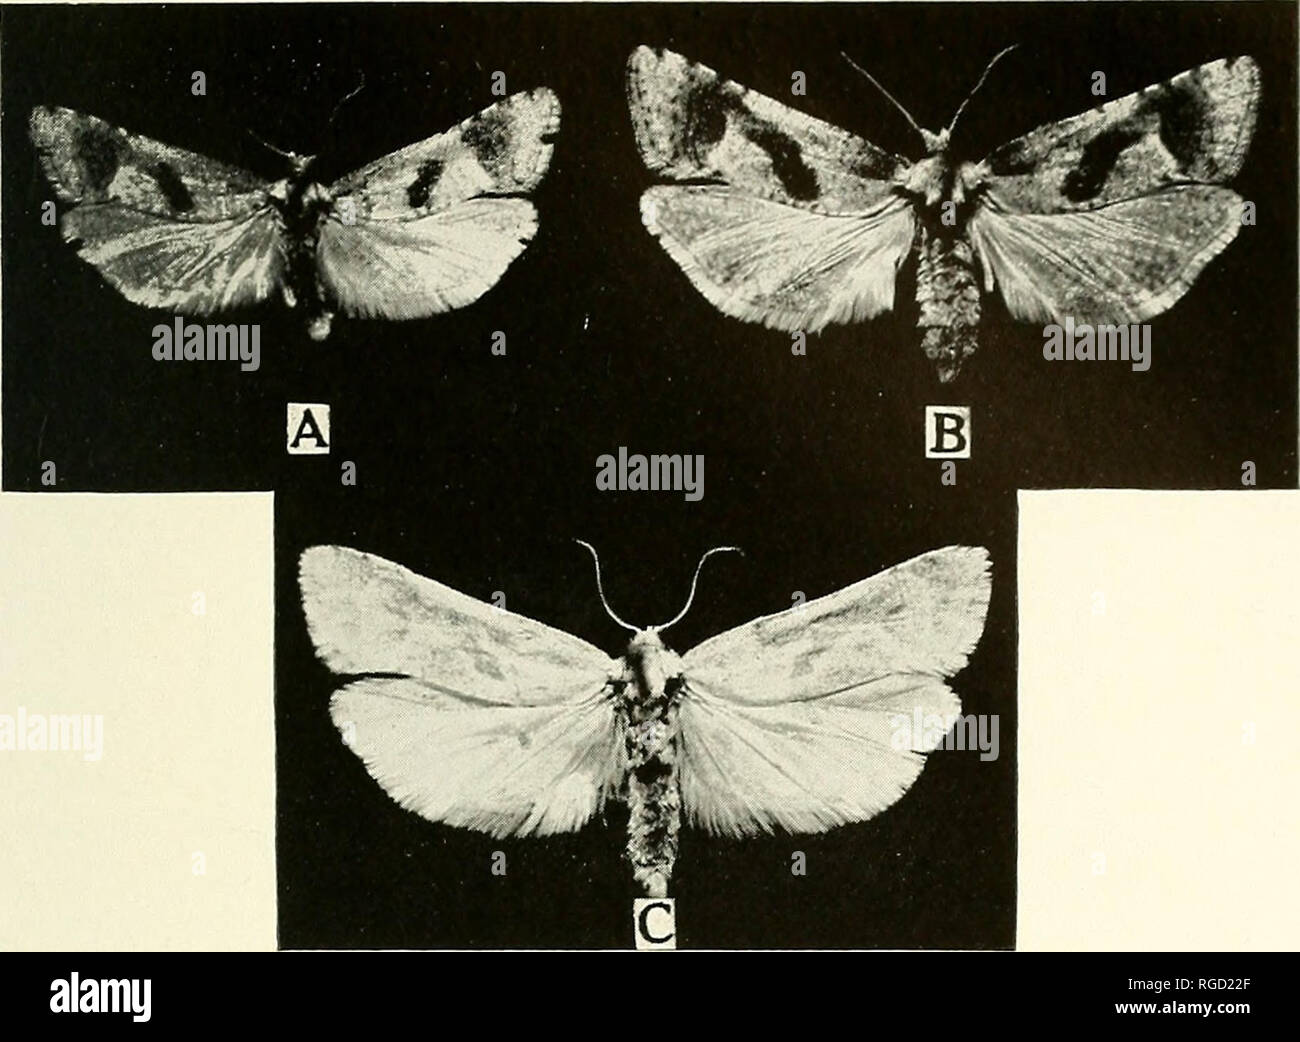 . Bulletin of the Southern California Academy of Sciences. Science; Natural history; Natural history. PLATE 22 Fig. A Holotype d, Carolella busckana Comst. Superior aspect, enlarged x 2. Fig. B. Allotype ?, C busckana Comst. Superior aspect, en- larged X 2. Fig. C. Allotype ?, C. busckana ioillettana Comst. Superior aspect, enlarged x 2. Photo by Cobb. Fringes, speckled black and white, the margins nearly black. Secondaries, superior surface, uniformly mottled or pebbled light brown and white, the brown irrorations suggesting the pat- tern of a netting. Fringes predominantly white. Inferior su Stock Photo